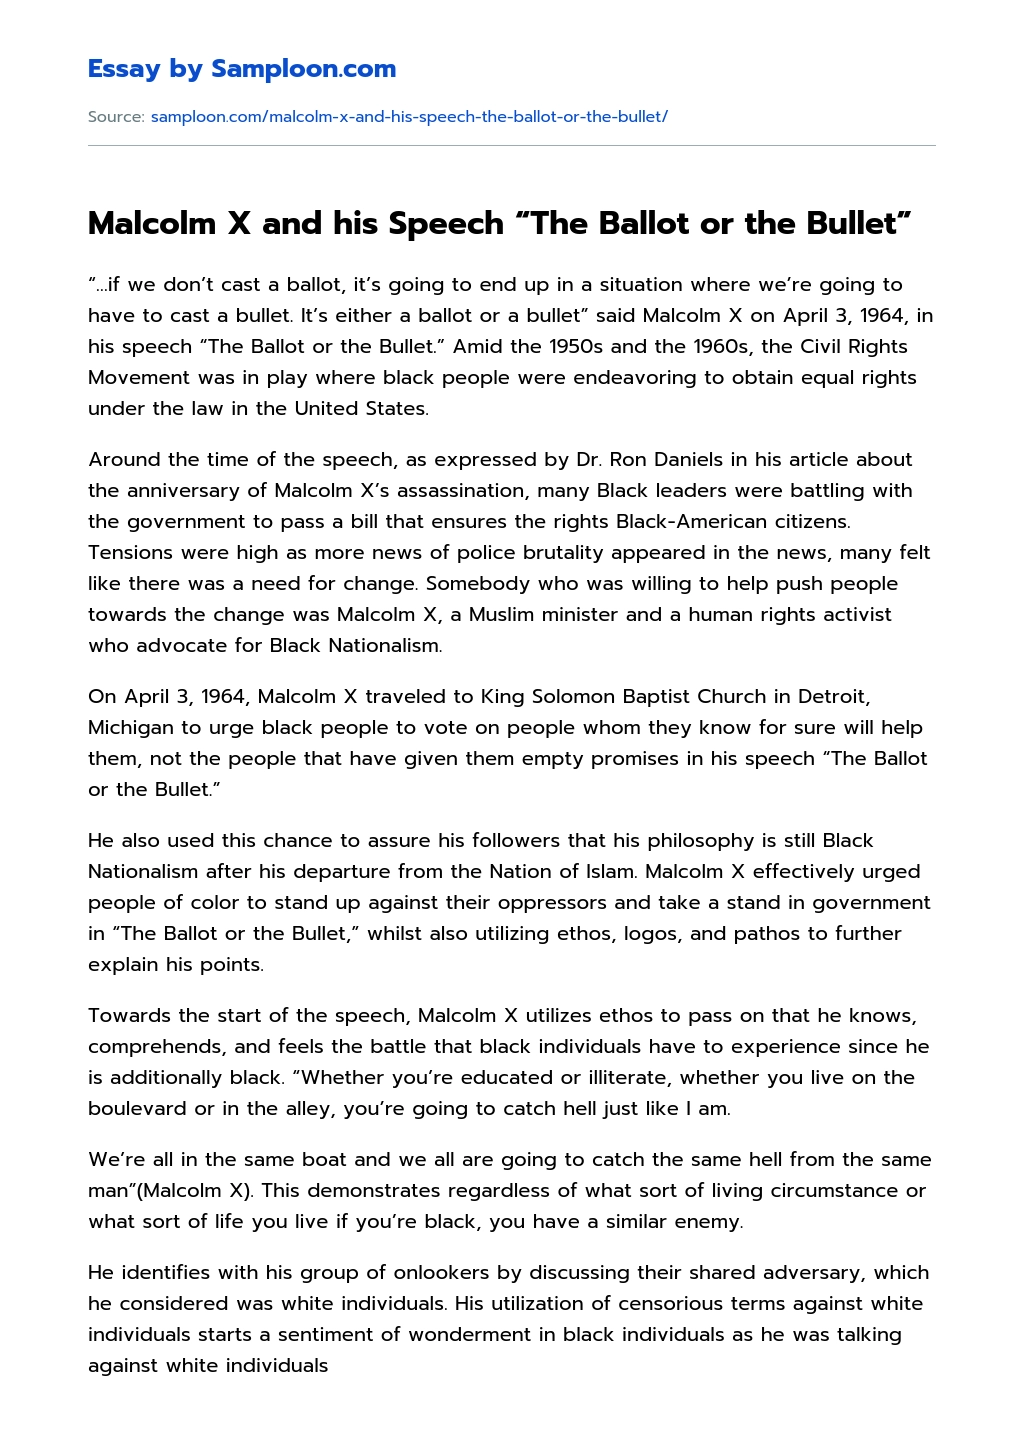 Malcolm X and his Speech “The Ballot or the Bullet” essay